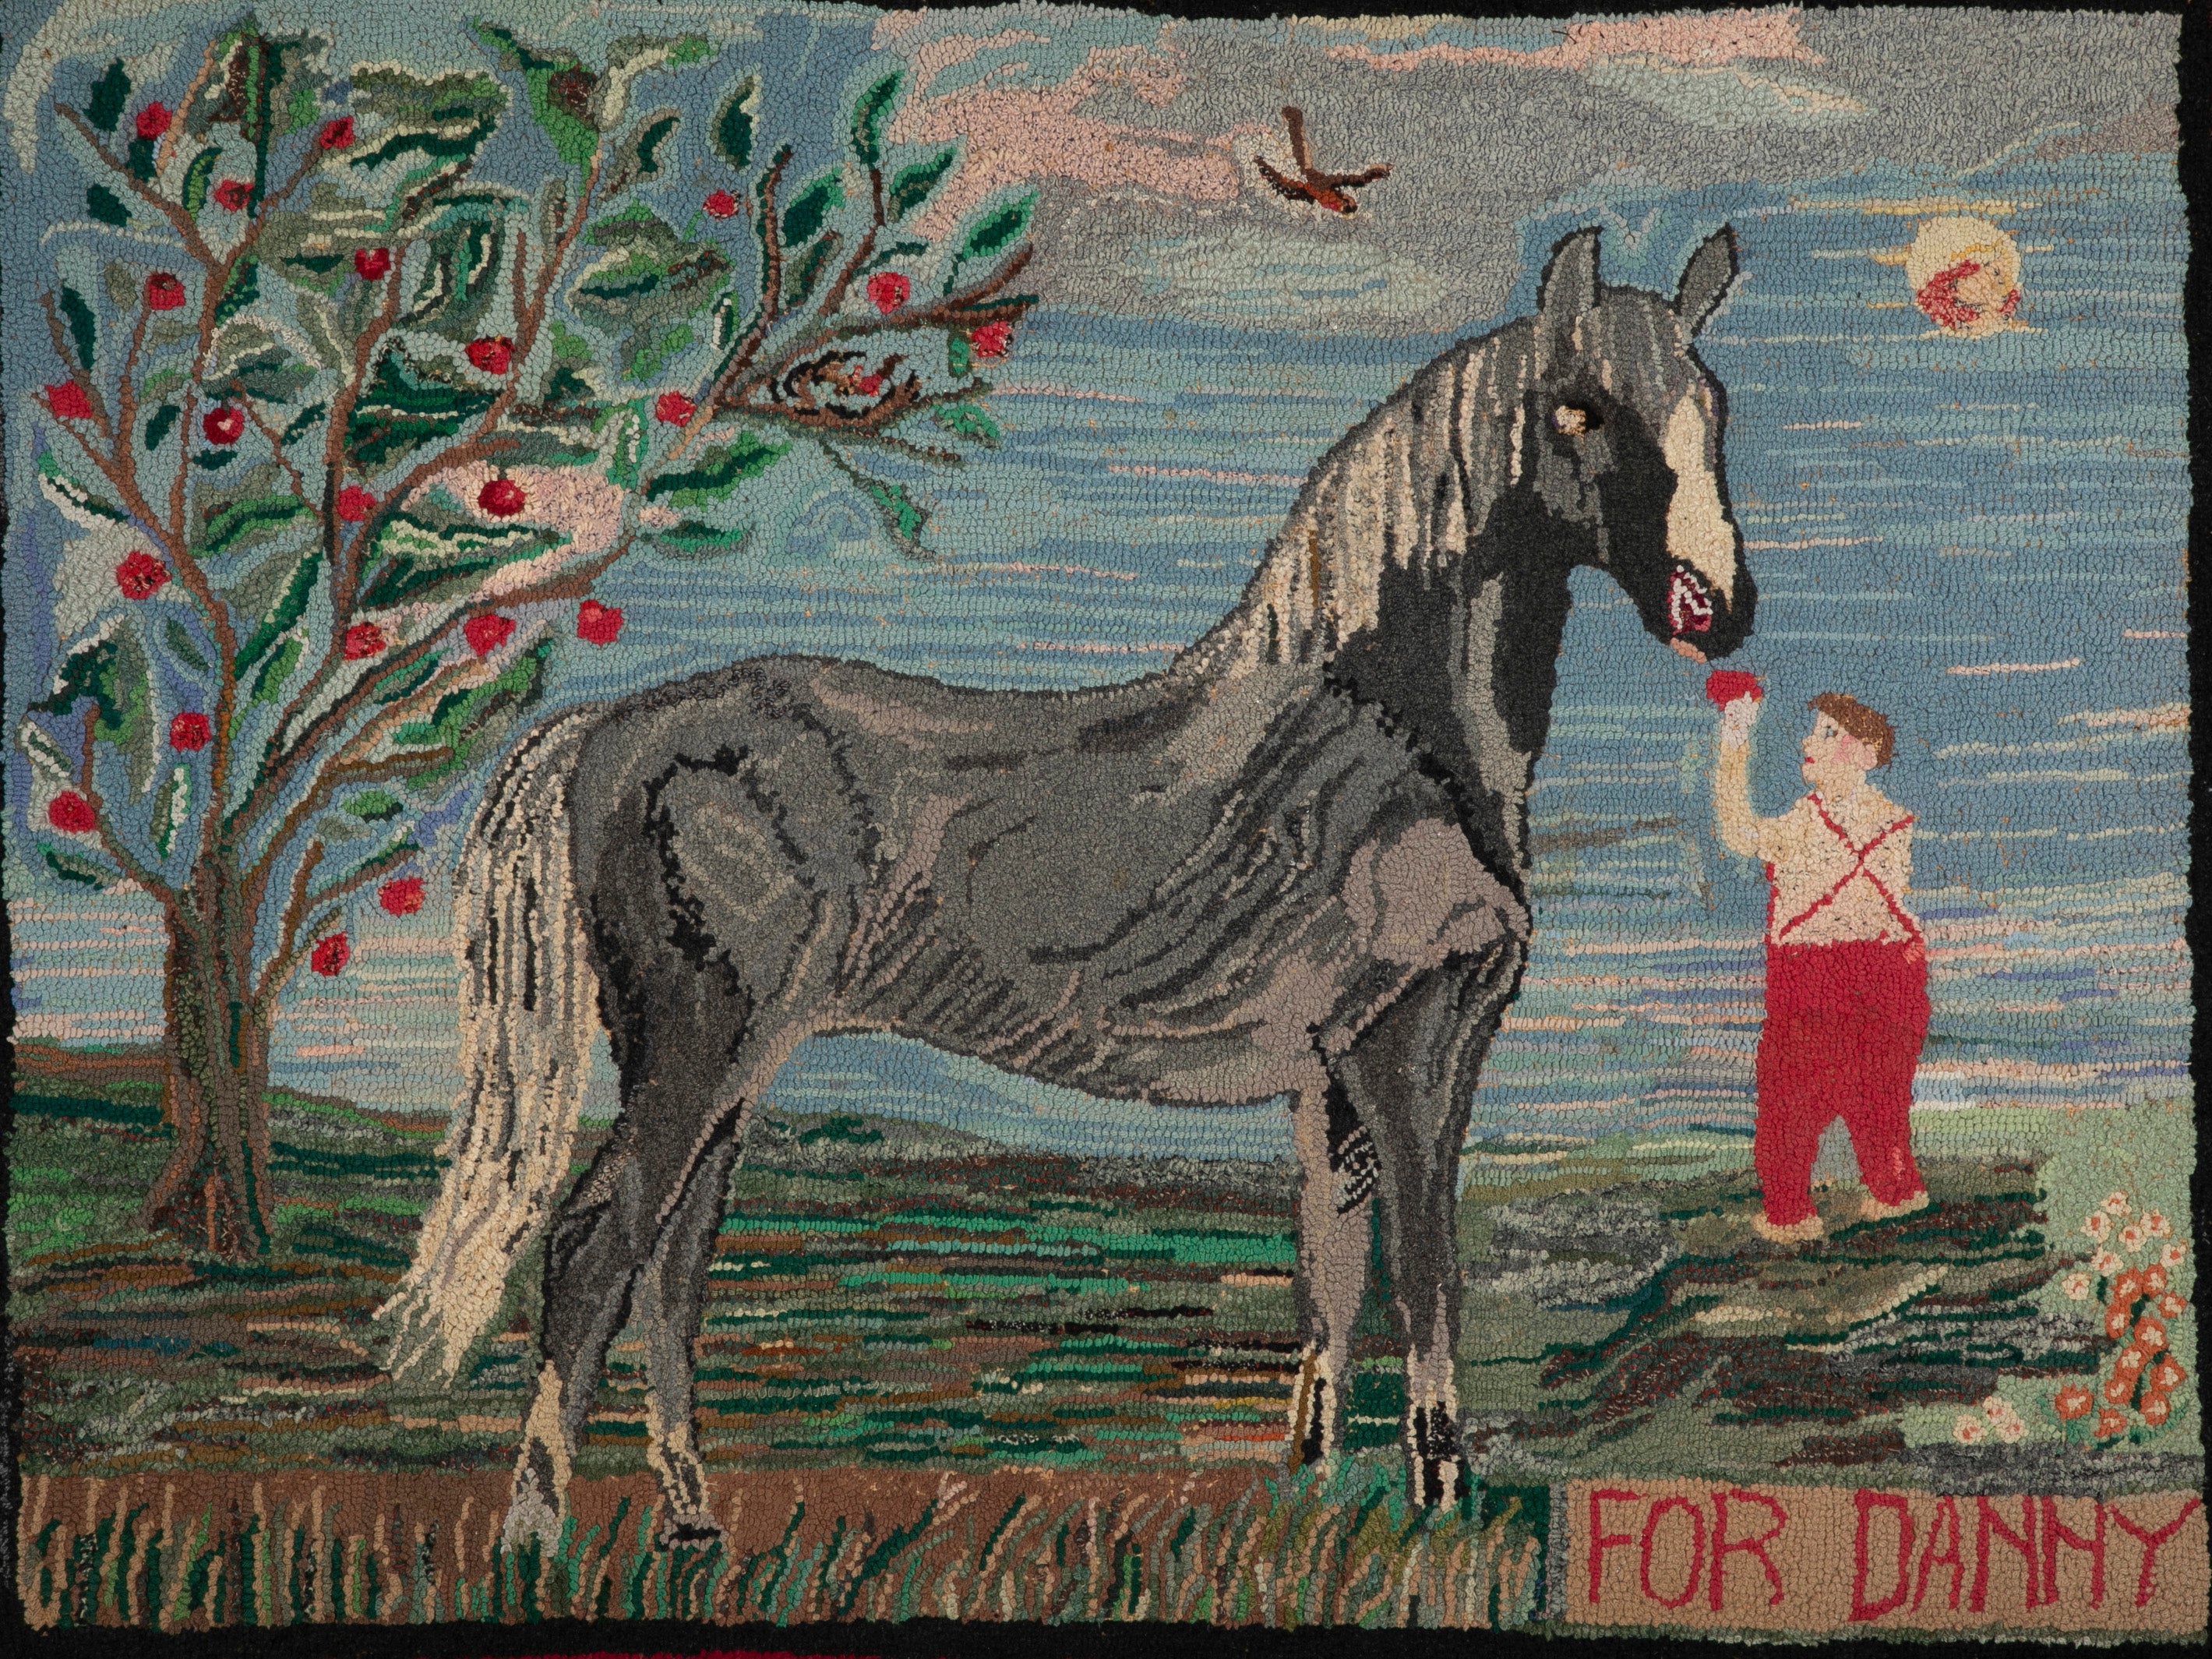 An Exceptional American Hooked Rug Depicting a Boy Feeding an Apple to a Horse